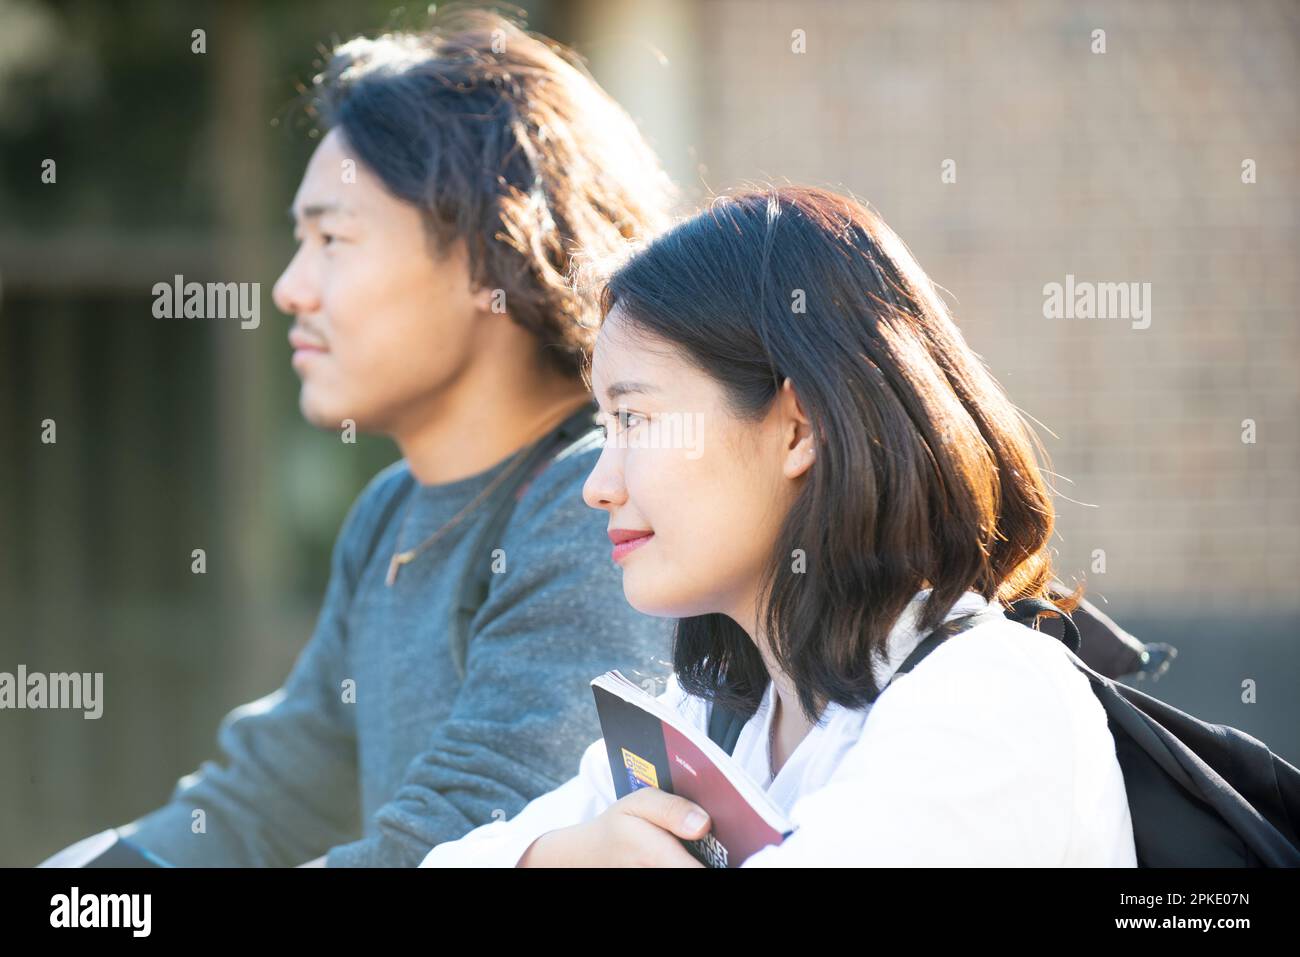 Profile of man and woman looking into the distance Stock Photo